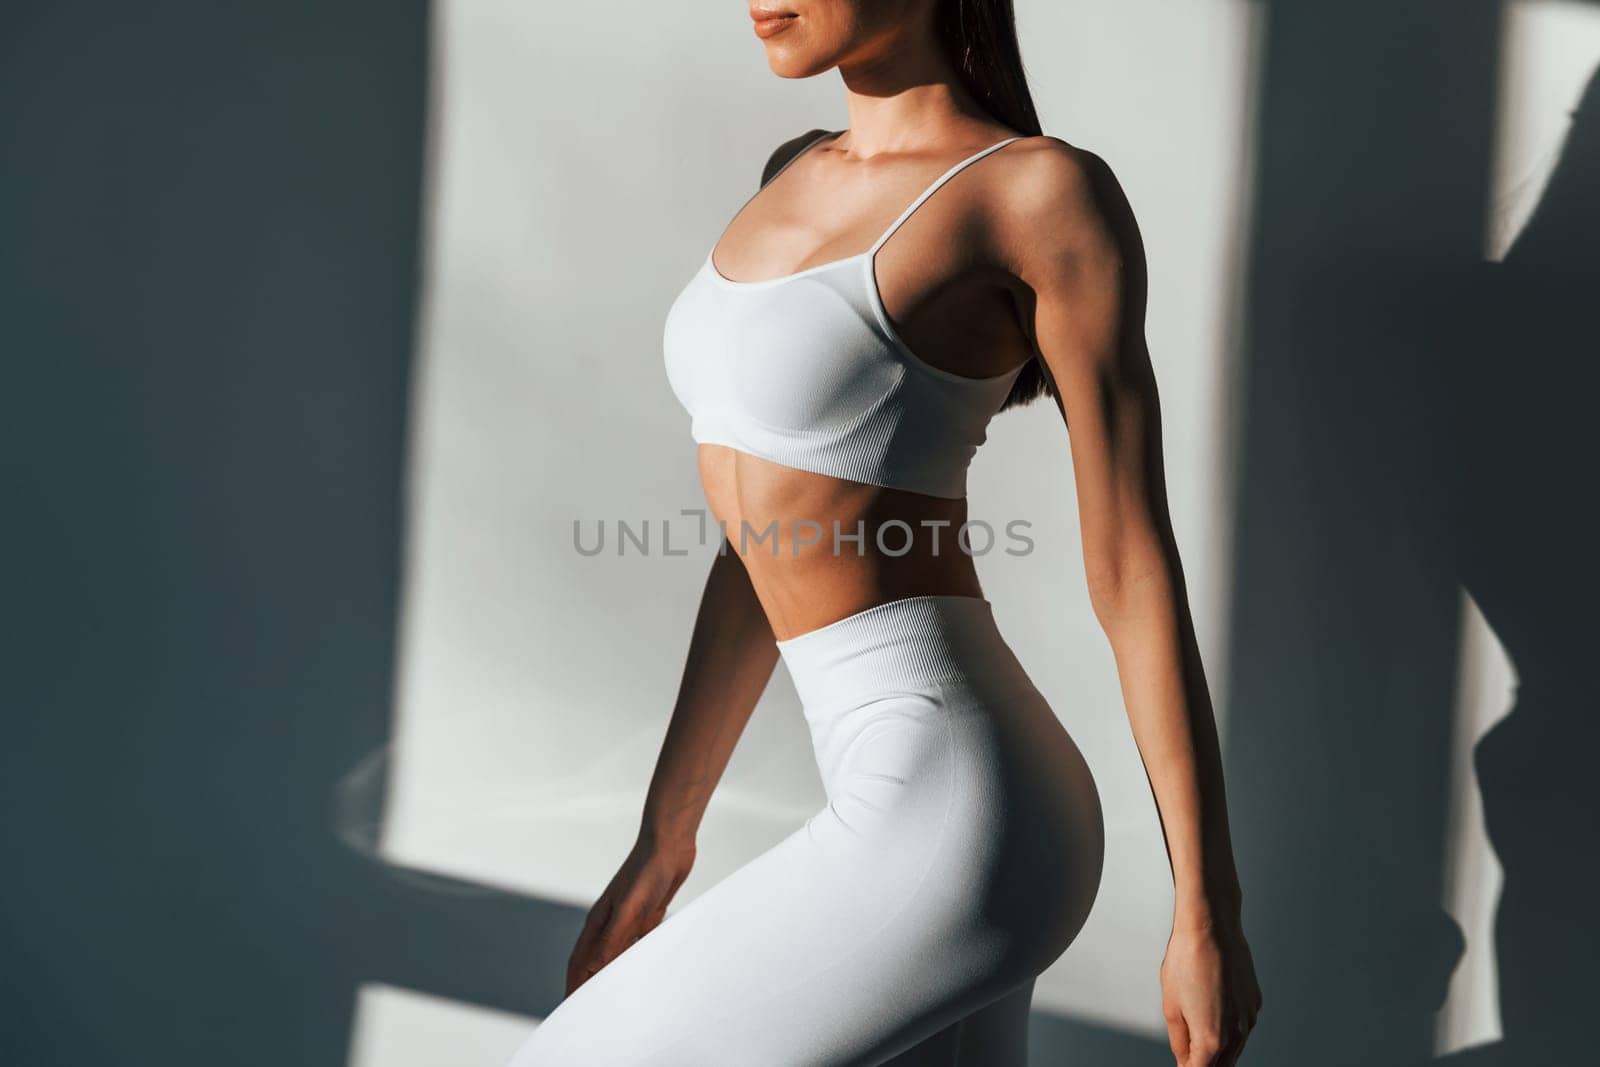 In white sportive clothes. Young caucasian woman with slim body shape is indoors at daytime.